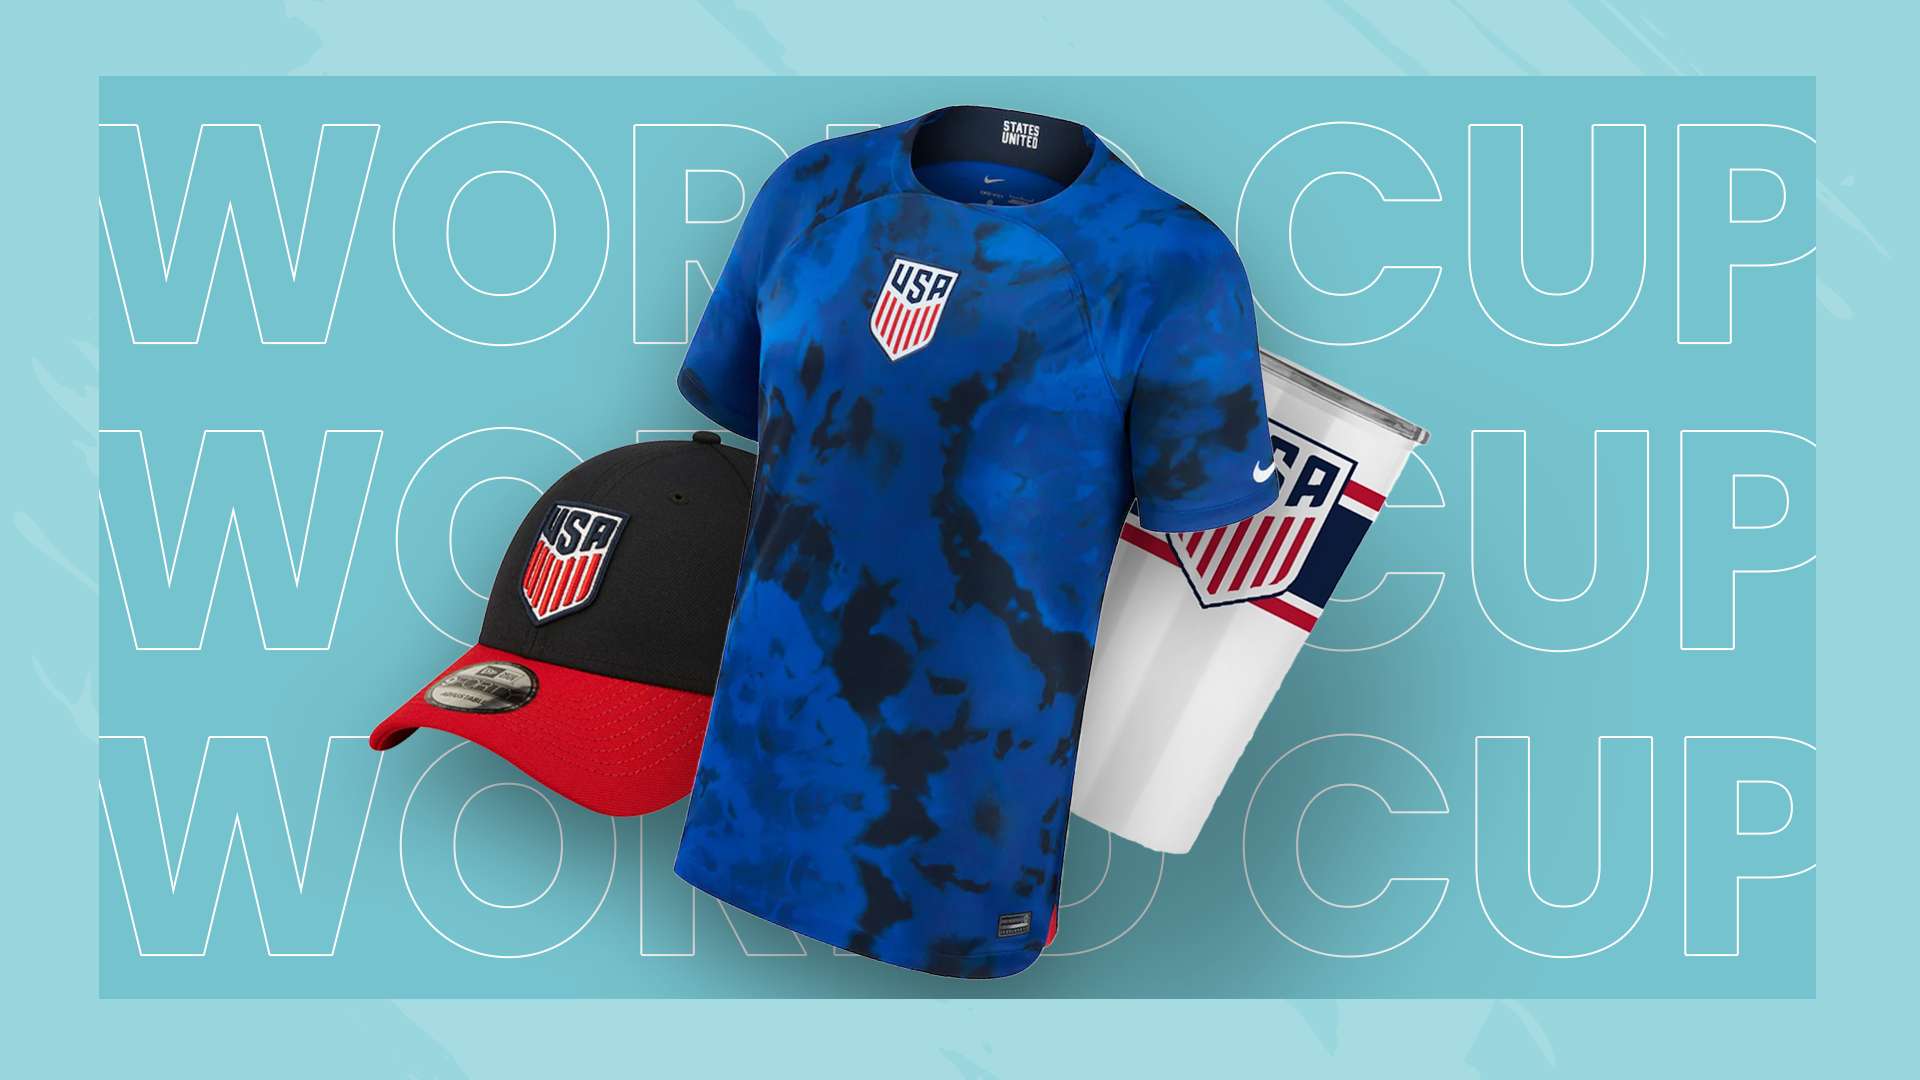 2022 World Cup USMNT kit and merch